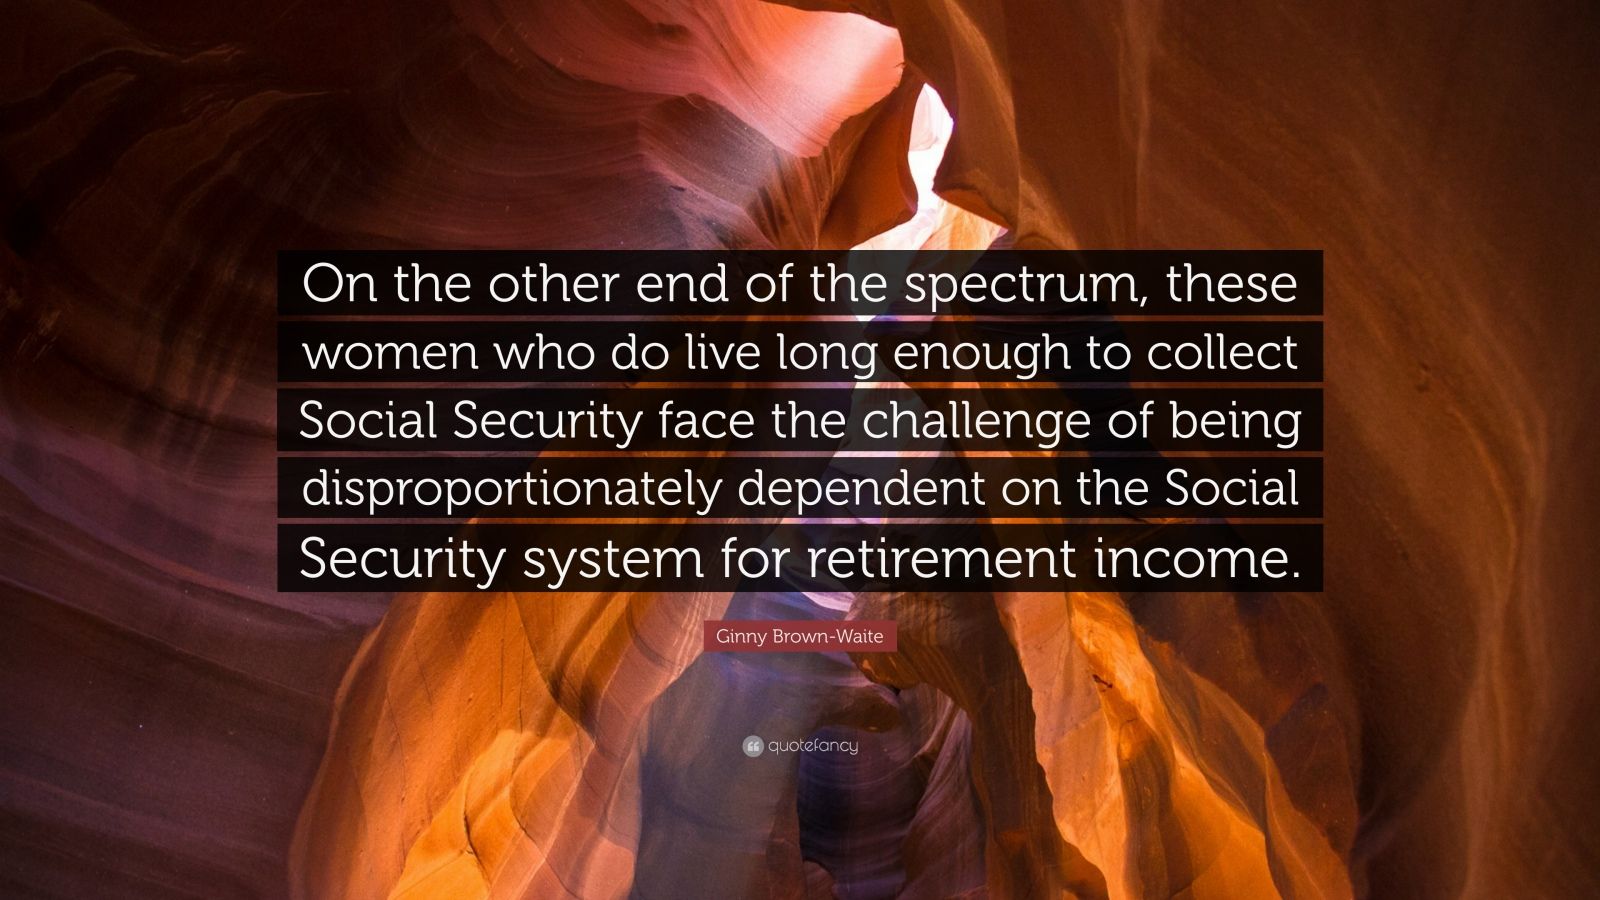 Ginny Brown Waite Quote On The Other End Of The Spectrum These Women Who Do Live Long Enough To Collect Social Security Face The Challenge Of B 7 Wallpapers Quotefancy